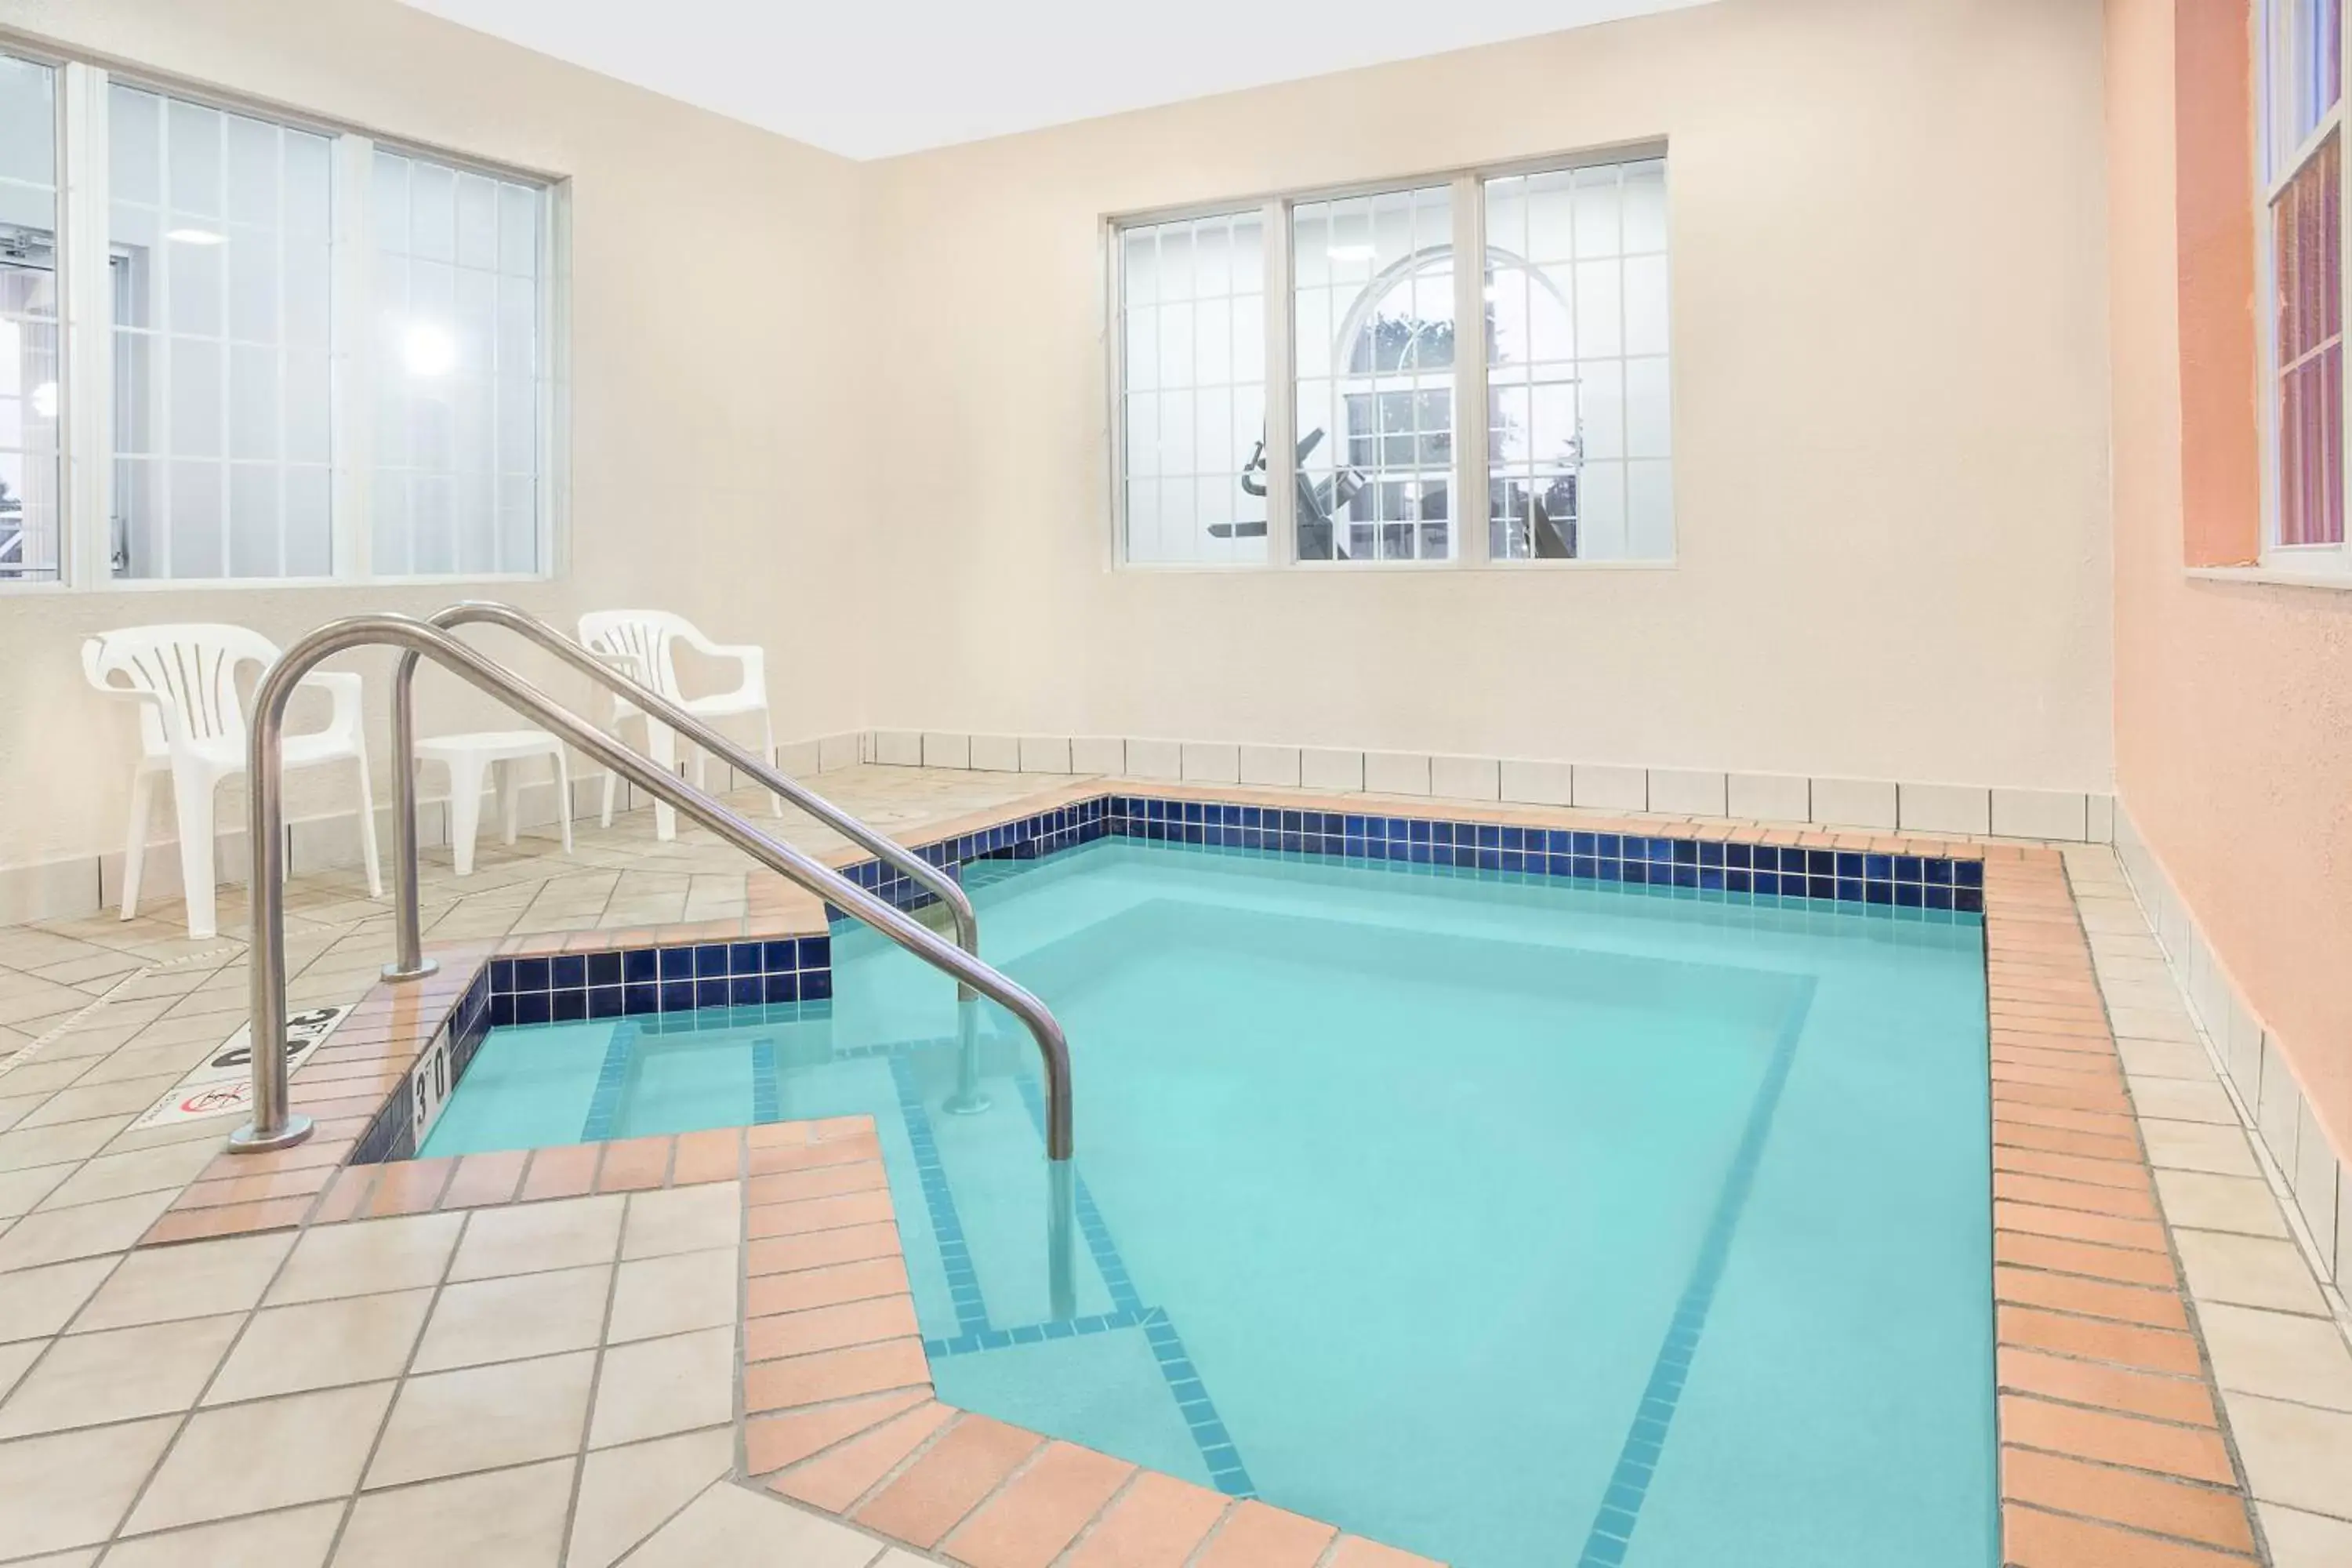 Hot Tub, Swimming Pool in Microtel Inn and Suites by Wyndham Appleton